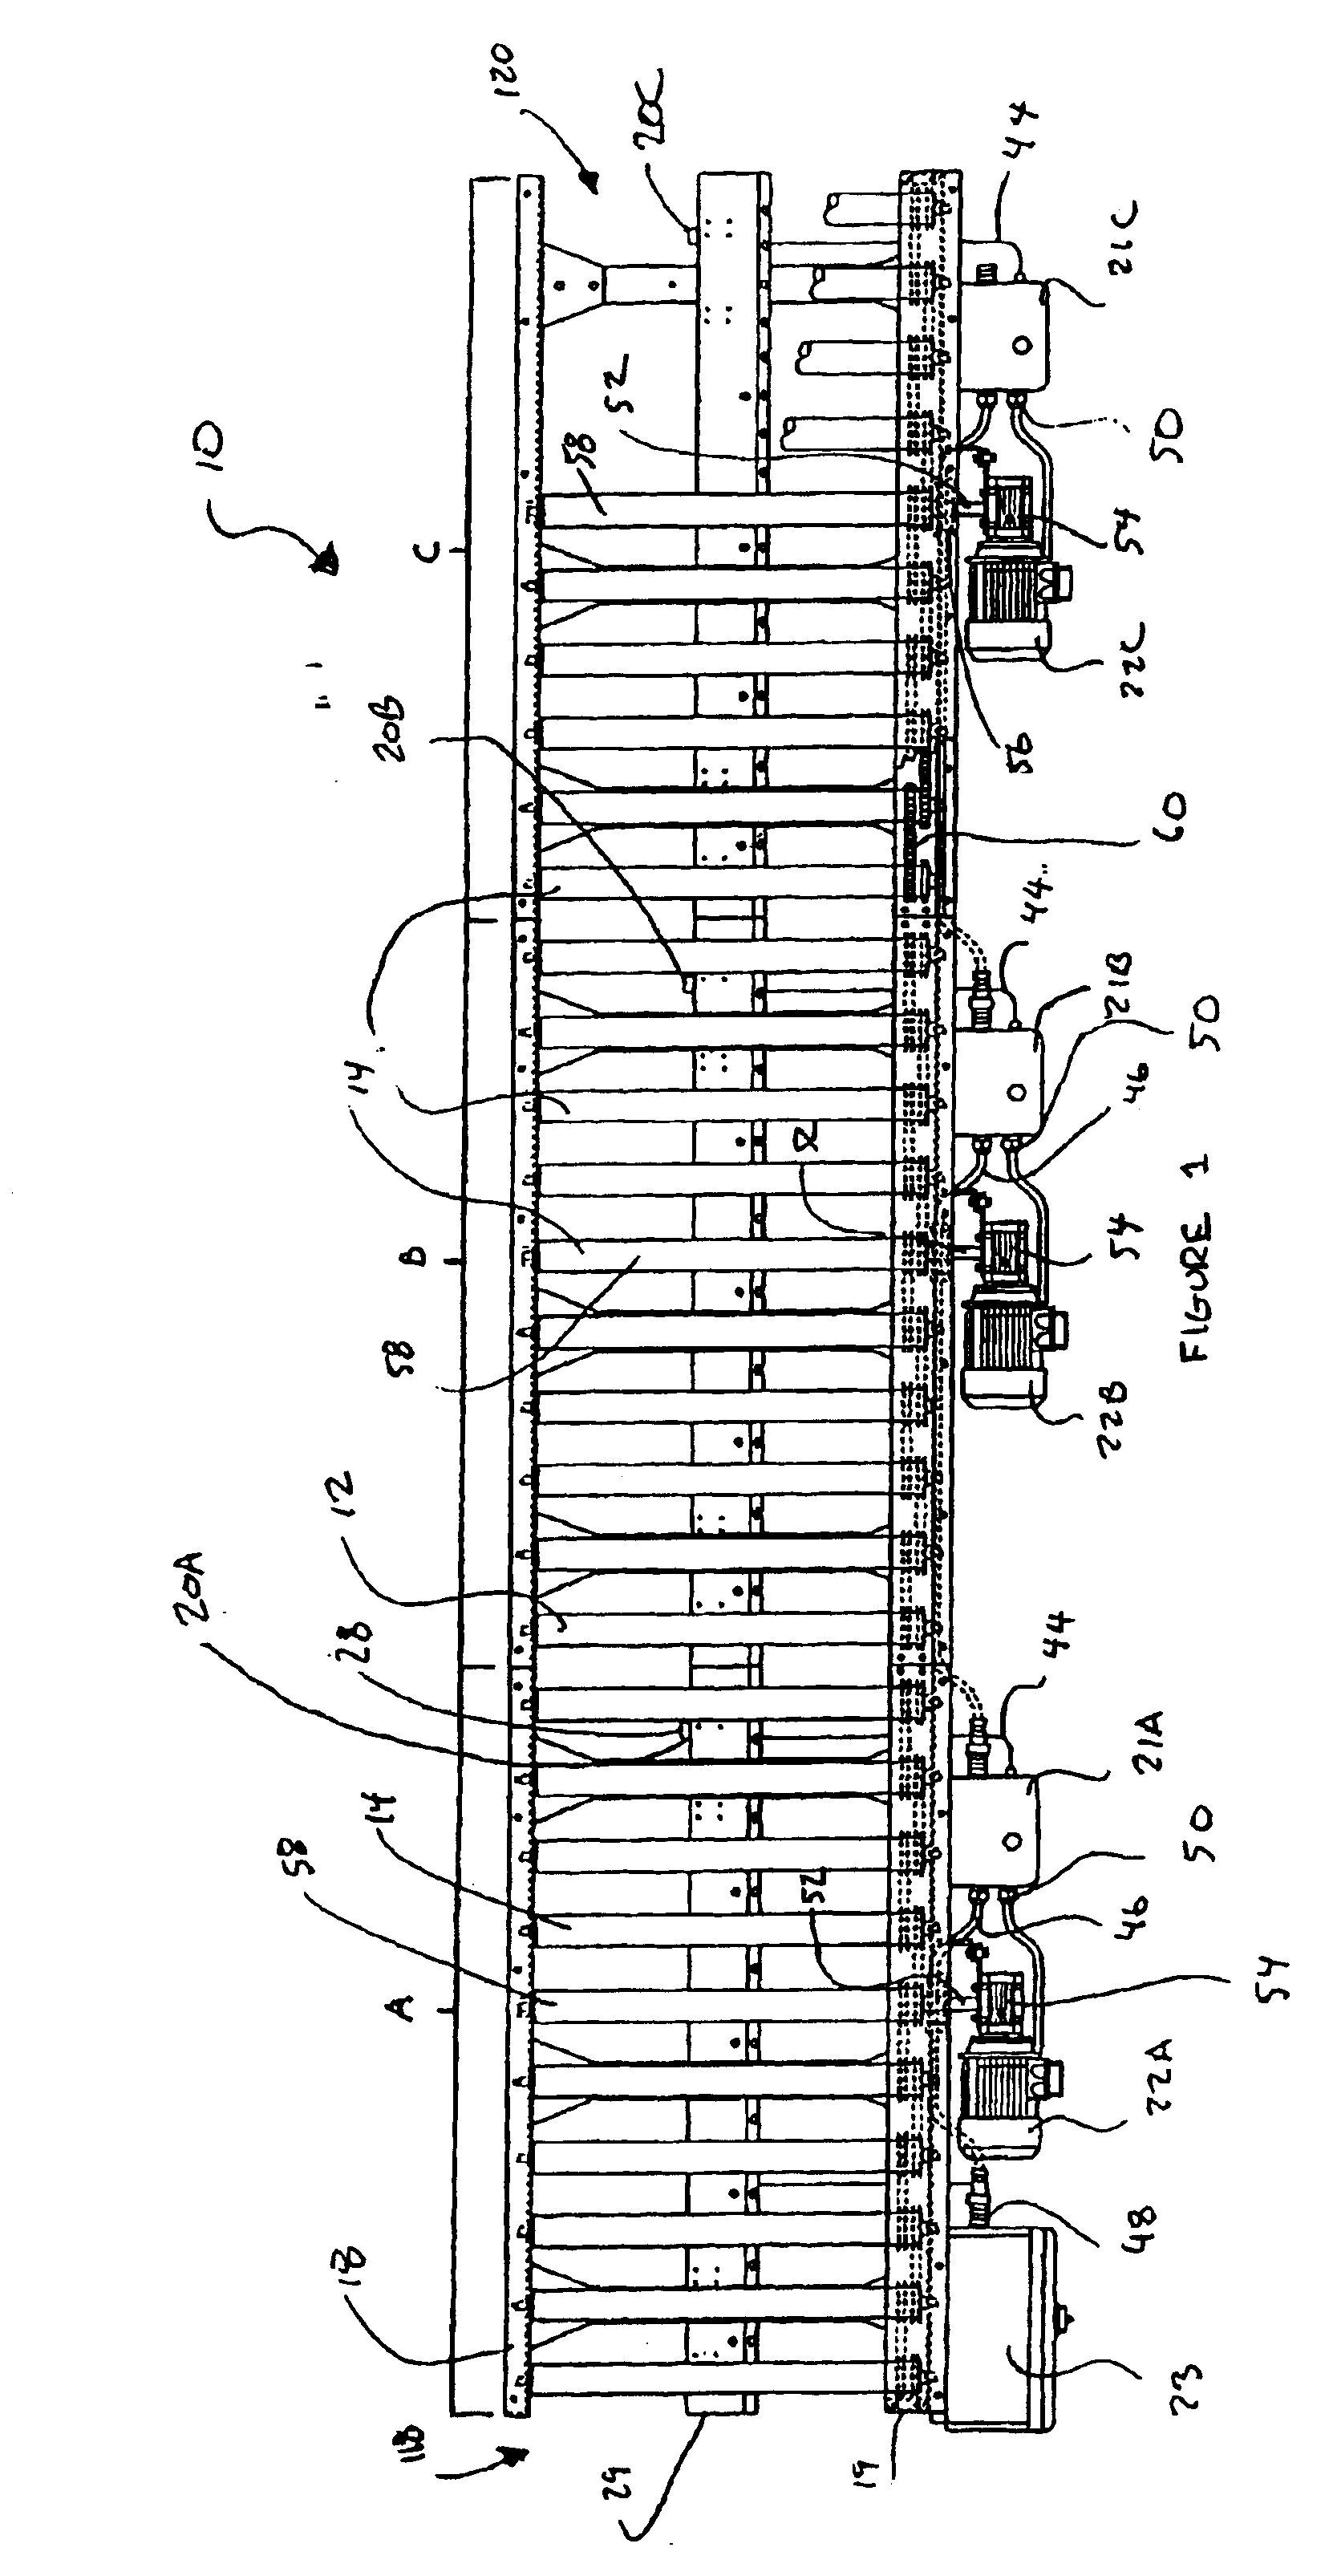 Decentralized drive system for a conveyor